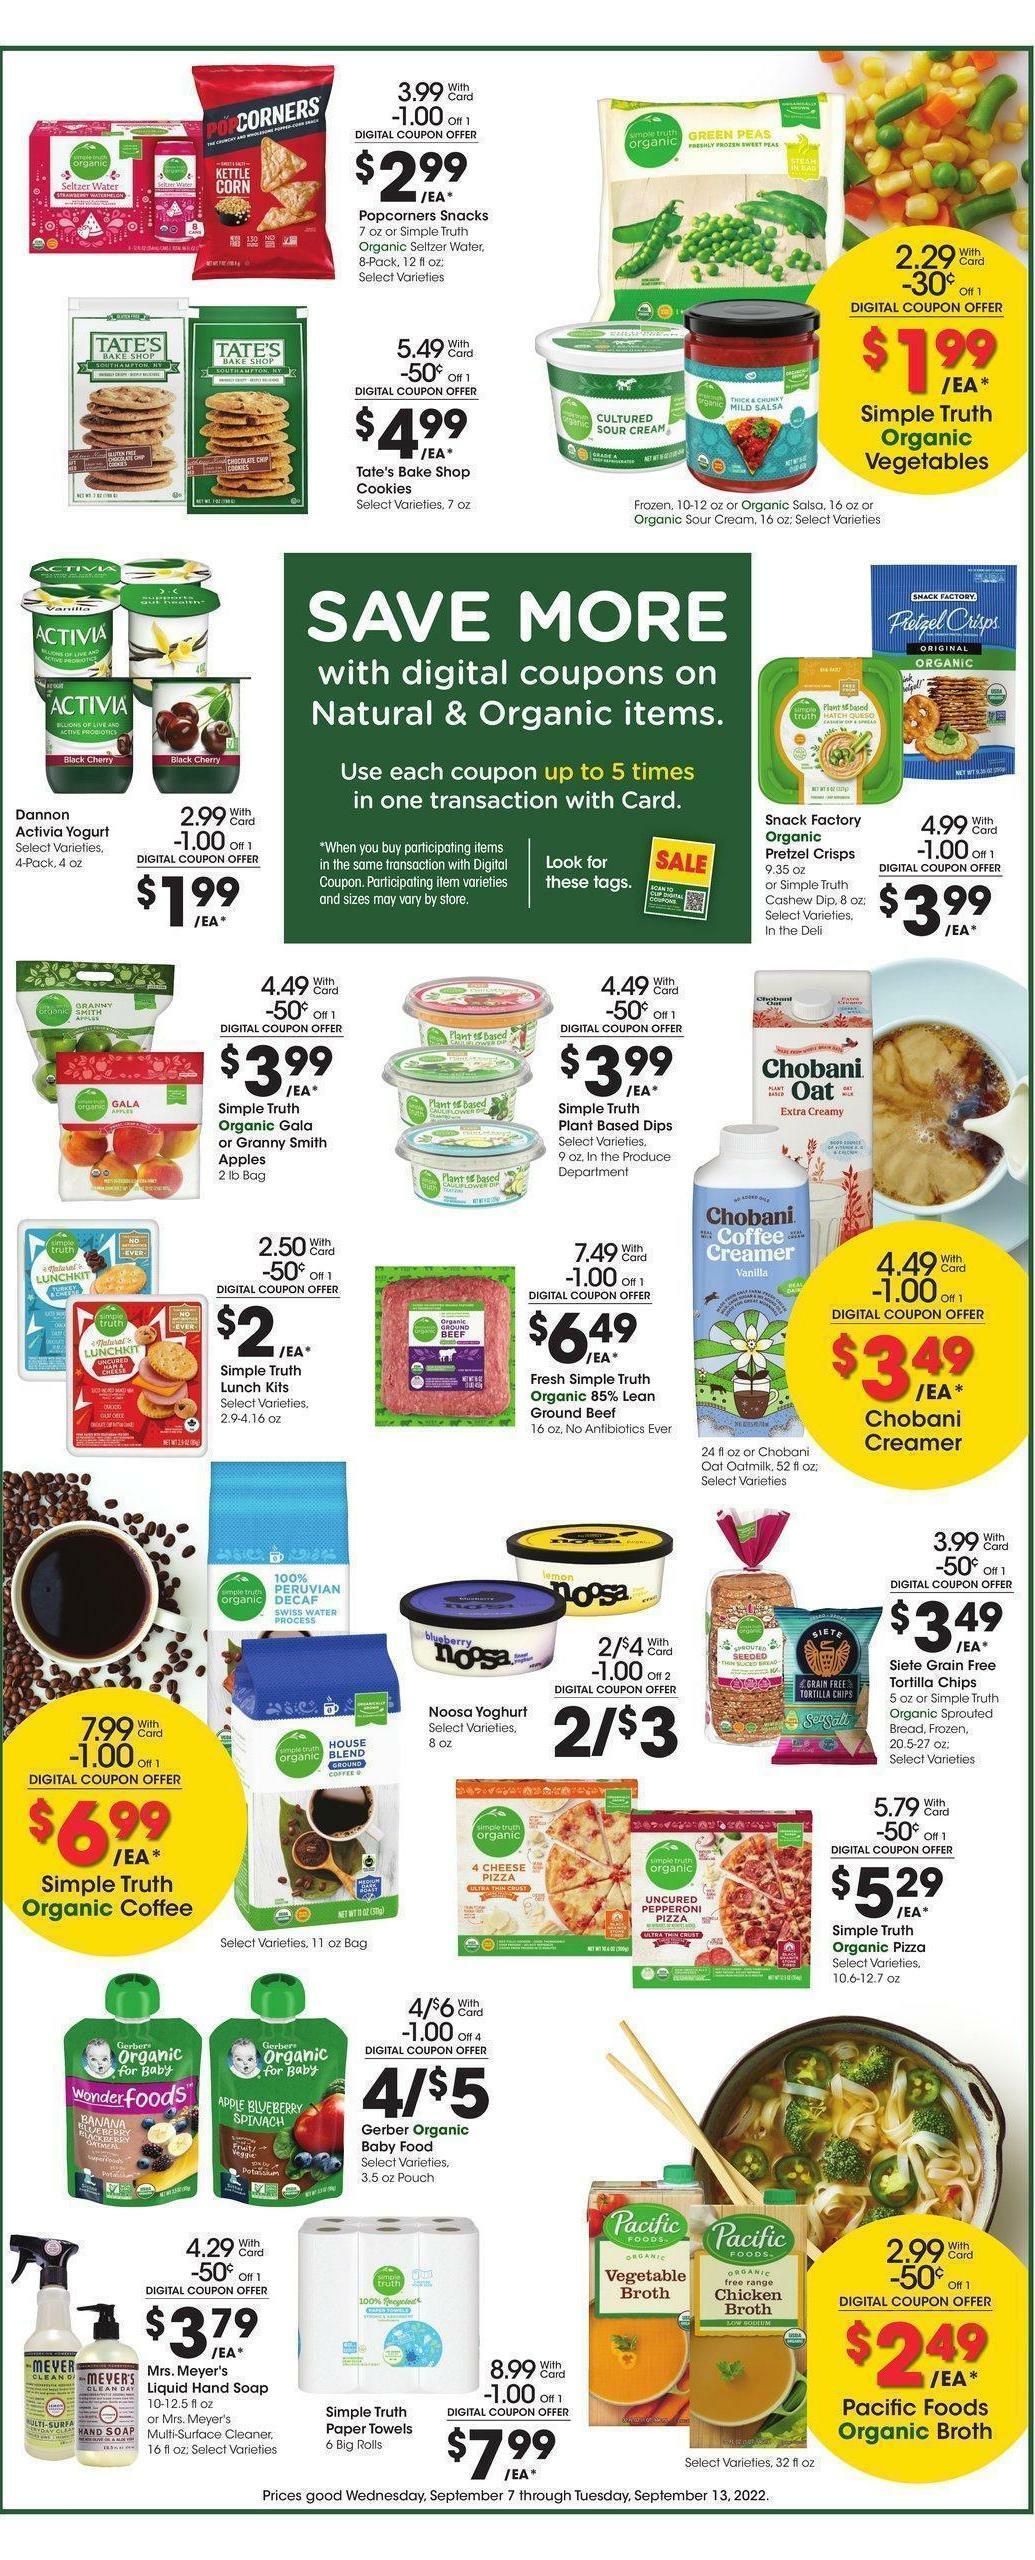 Kroger Weekly Ad from September 7